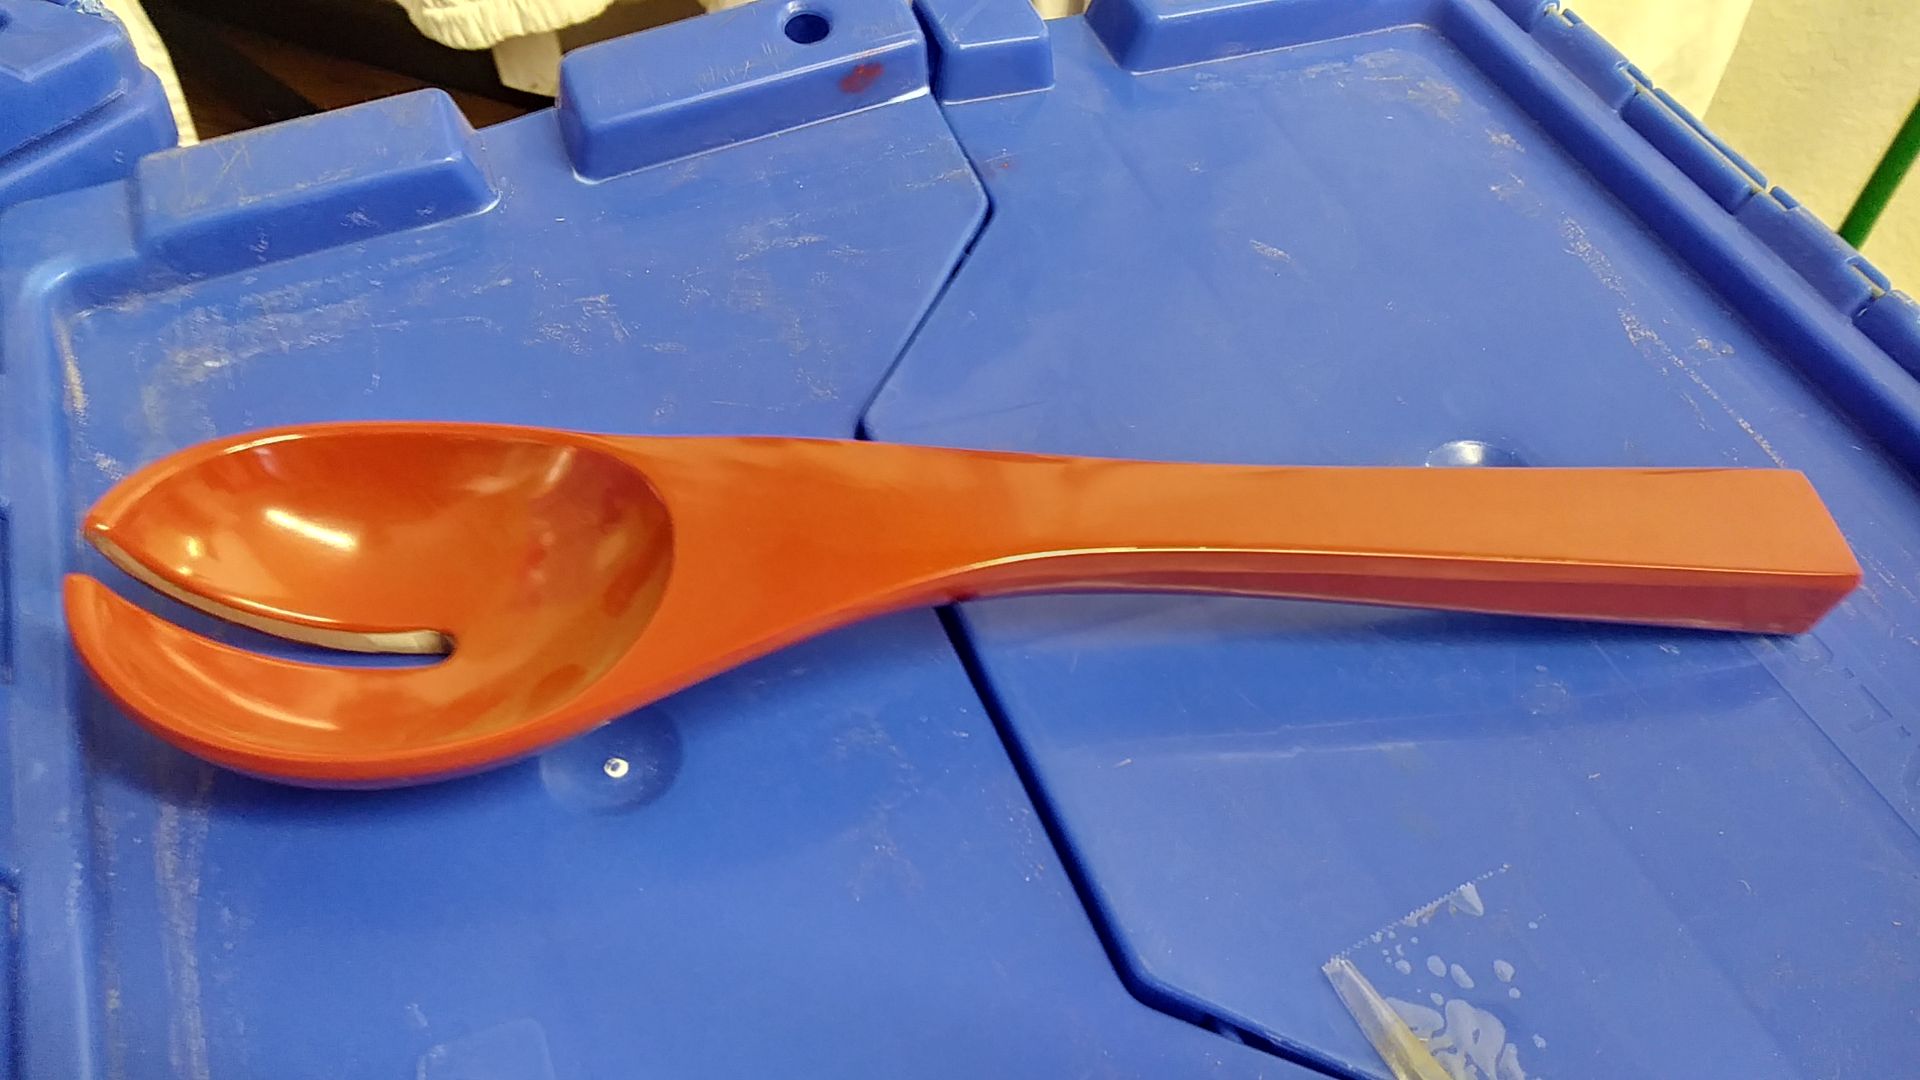 LARGE RED SLOTTED SPOONS (HARD PLASTIC) (APPROX 65 PIECES IN 1 BIN)